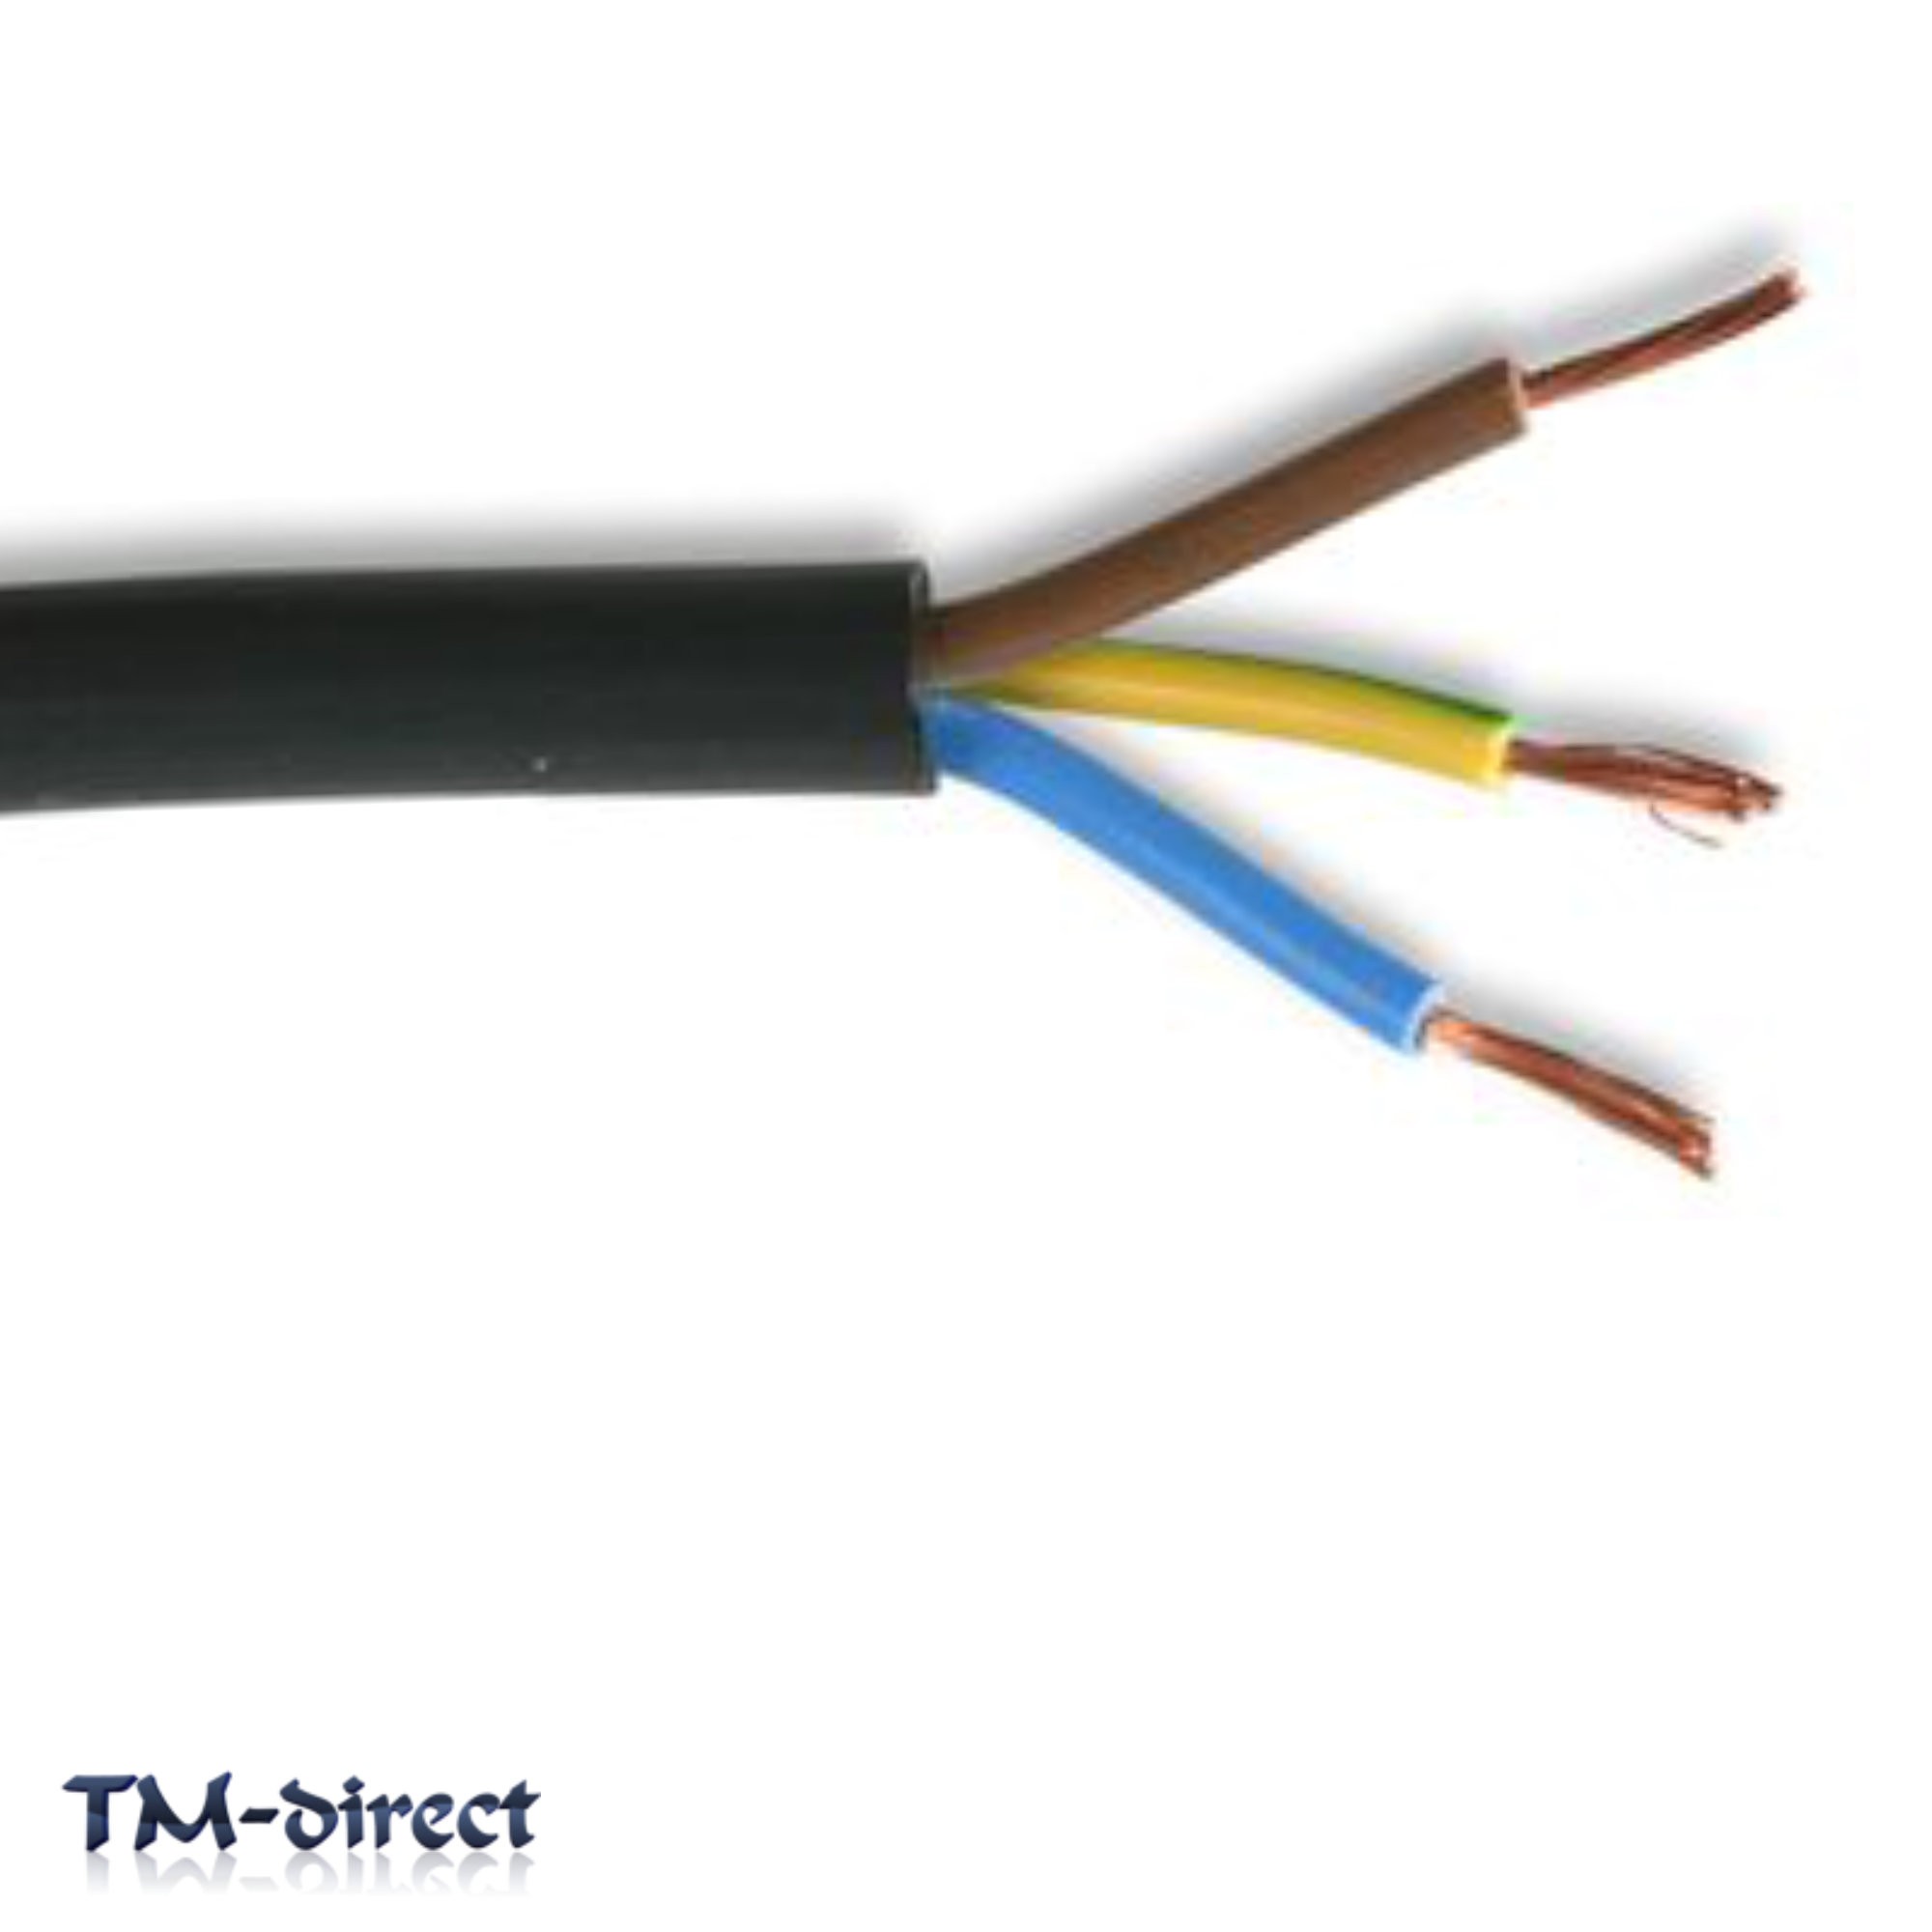 3183Y 3 Core 2.5mm Round Black Mains Electrical Cable Flex Wire BY THE METER 